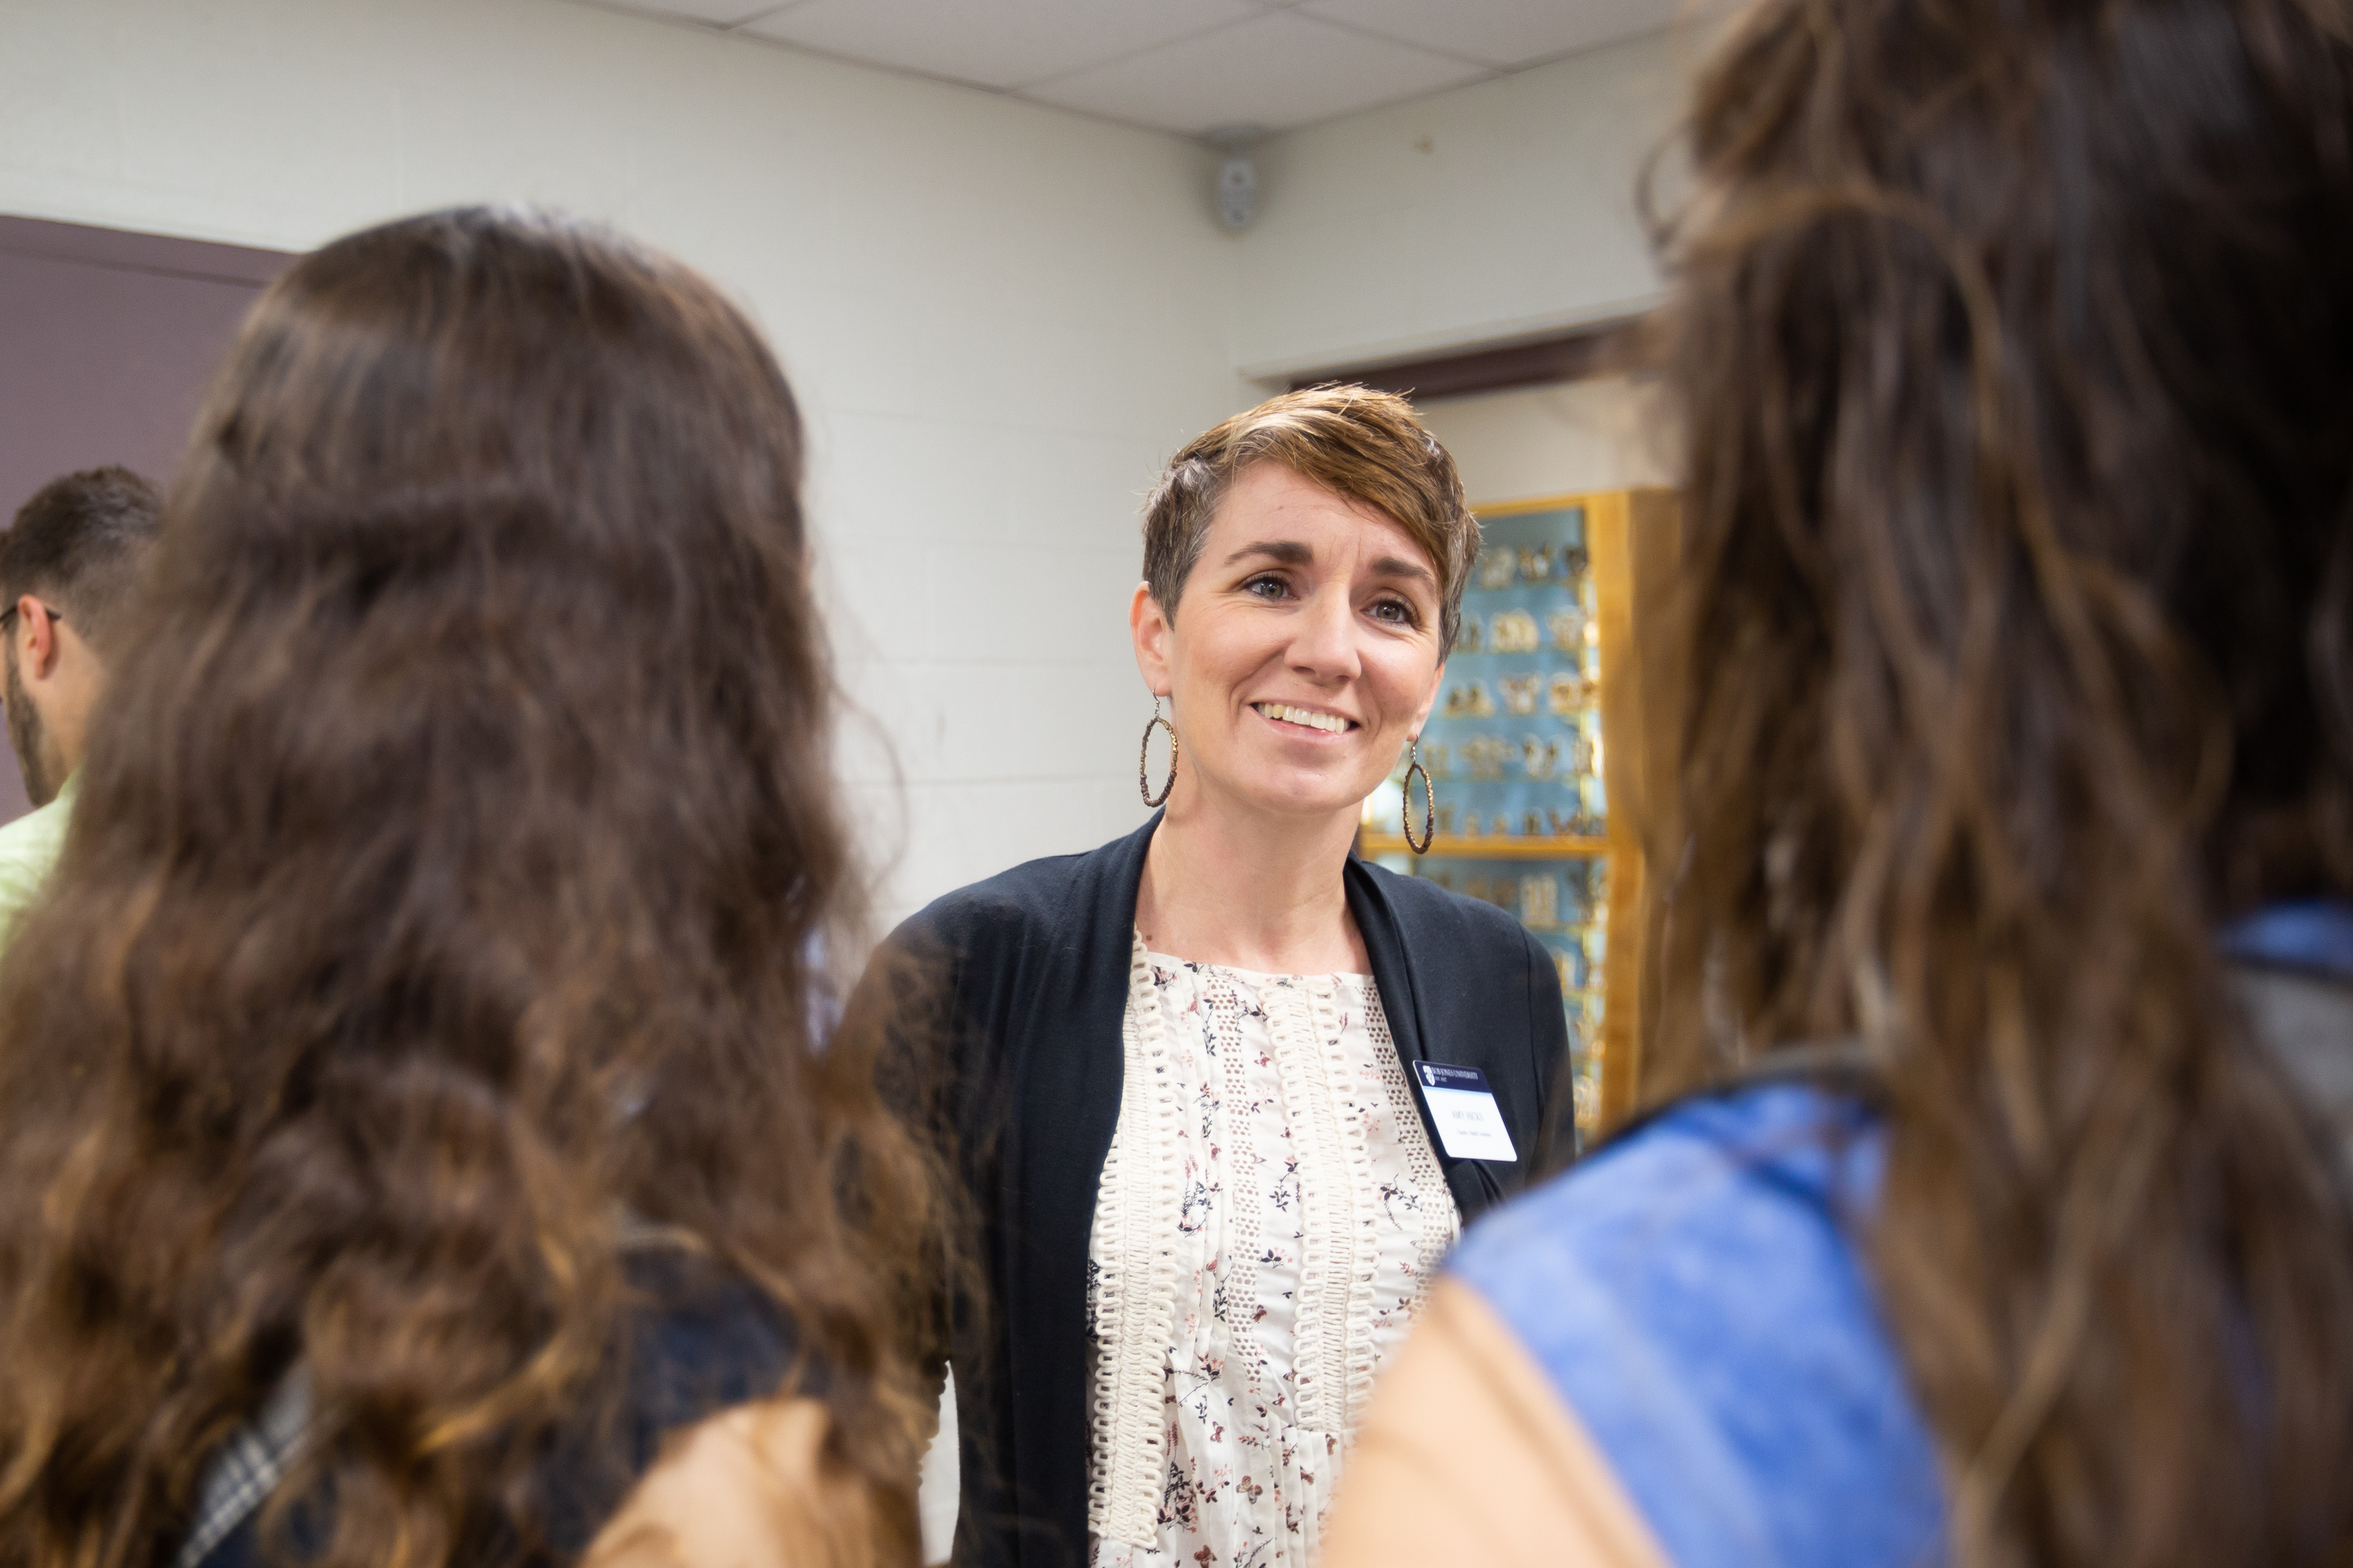 Dr. Amy Hicks meets new health sciences majors at the major meet and greet during Welcome Week